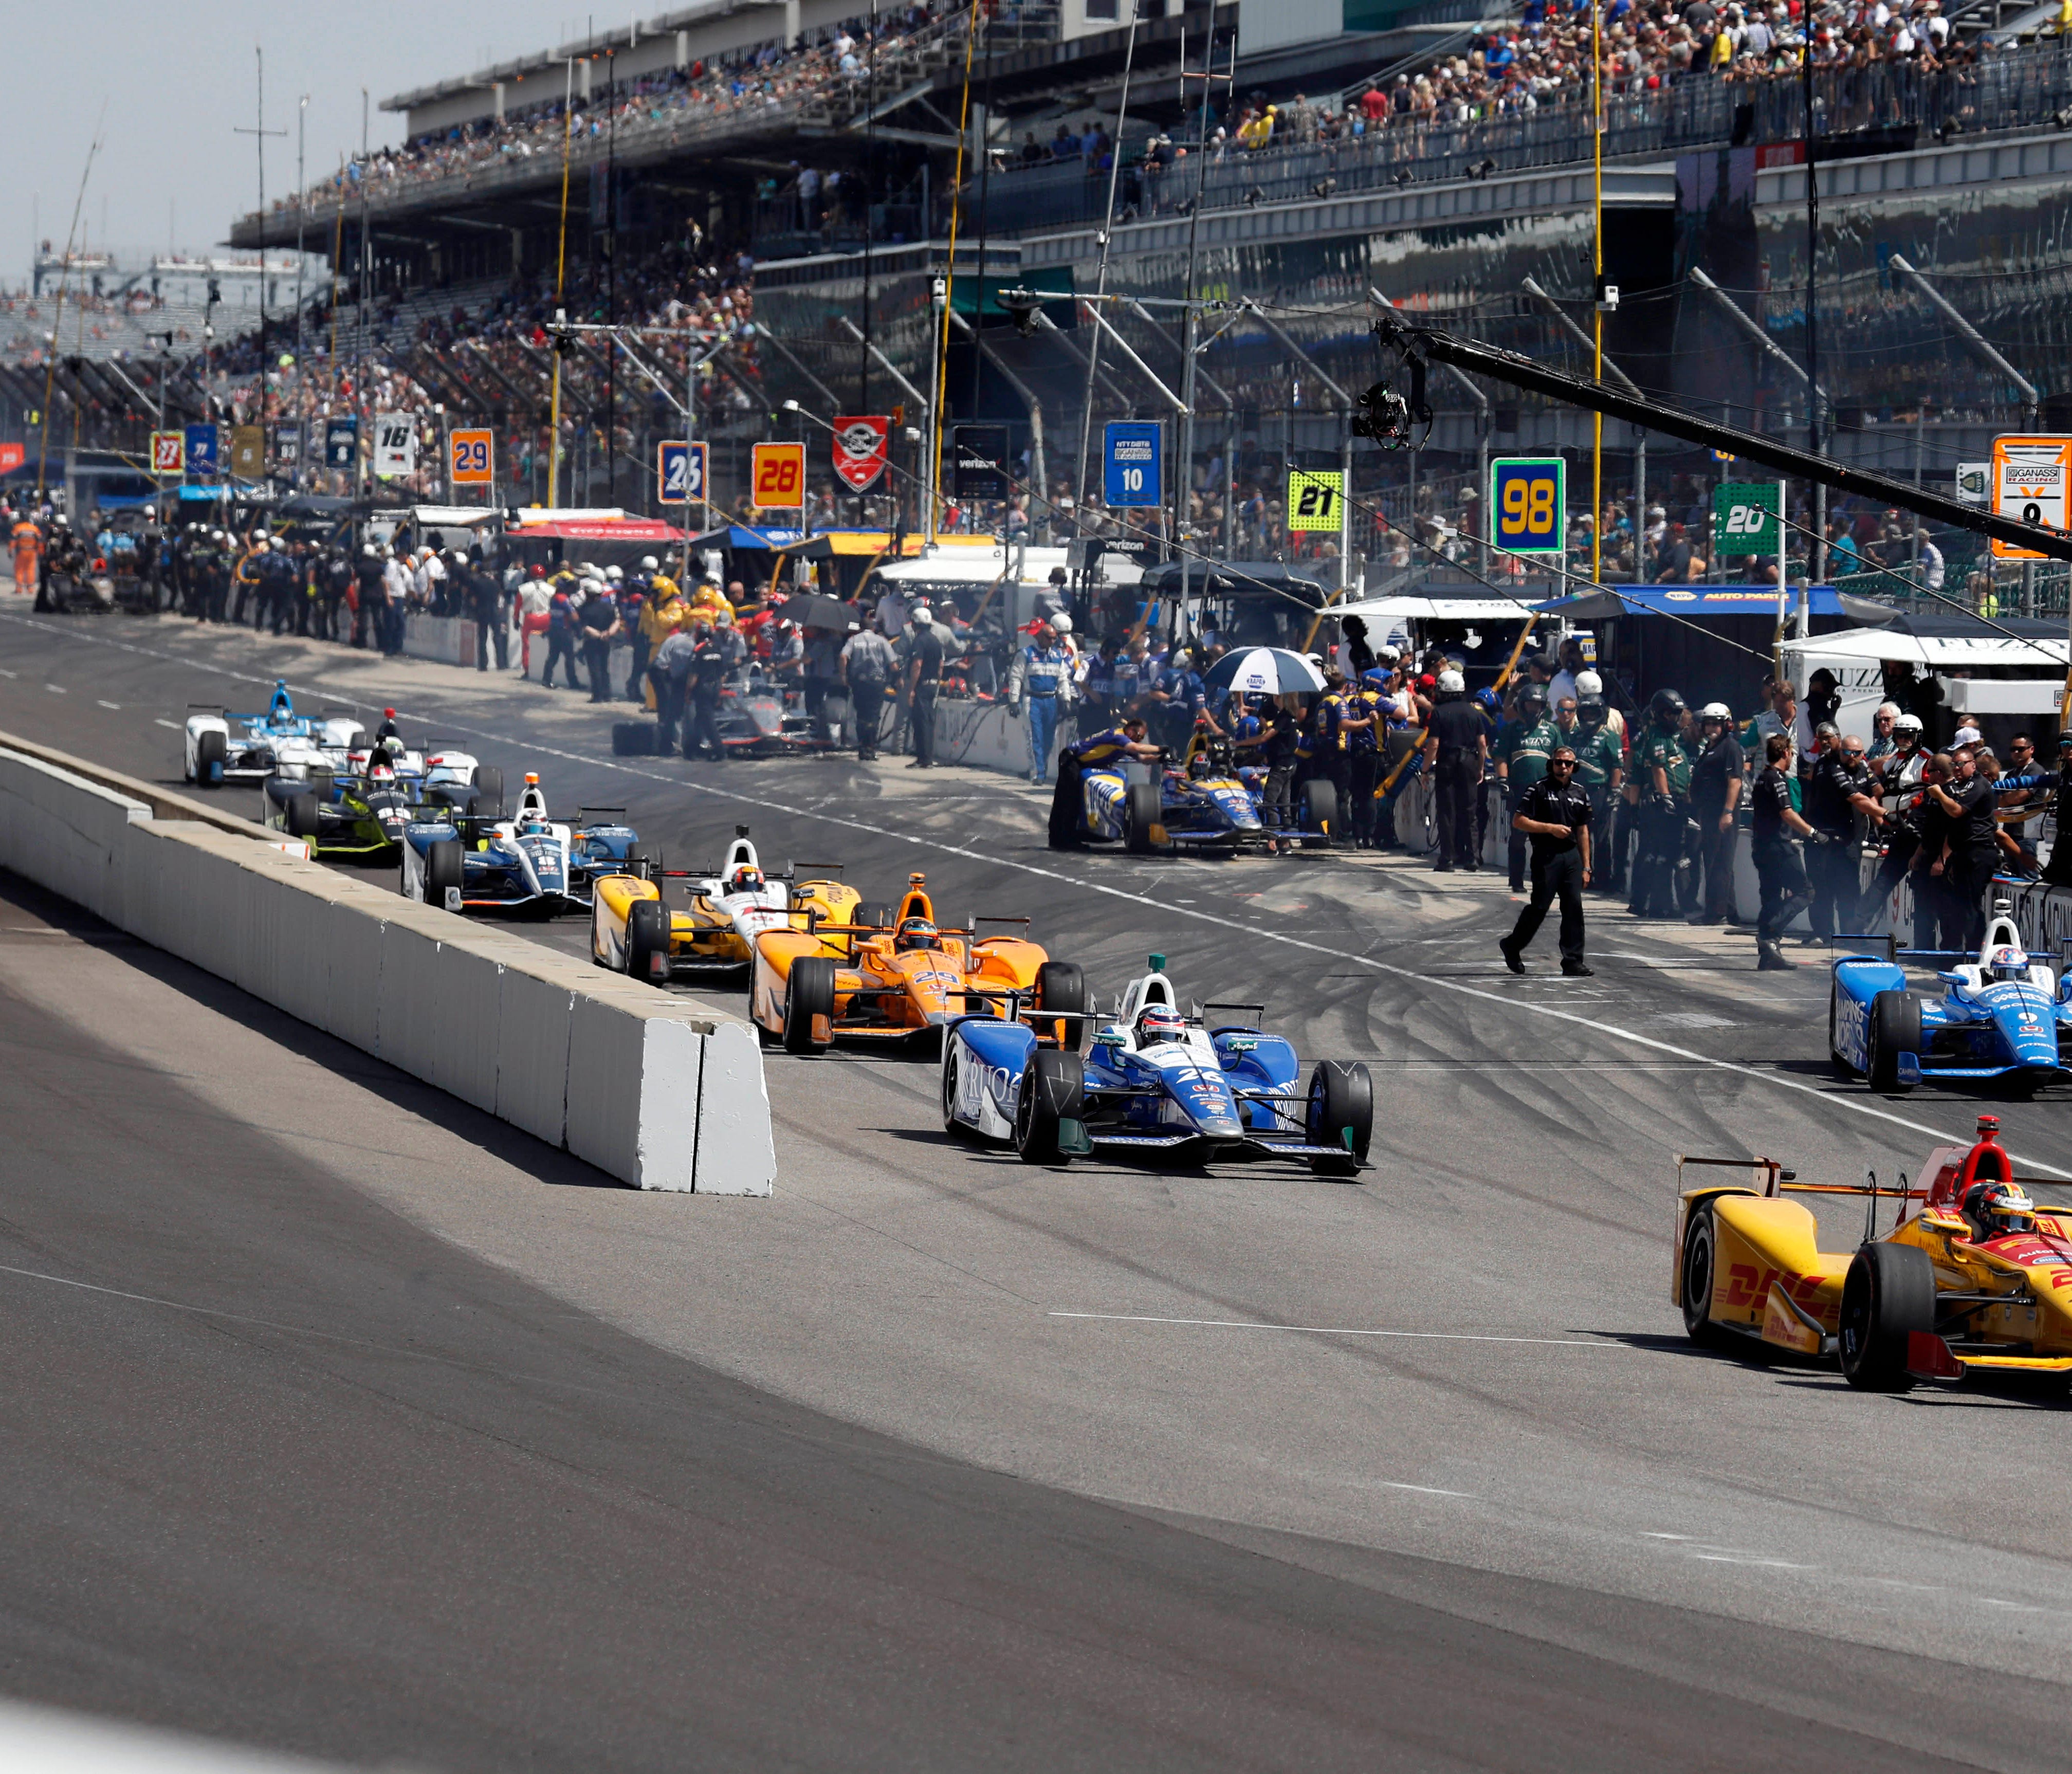 USP INDYCAR: 101ST RUNNING OF THE INDIANAPOLIS 500 S CAR USA IN